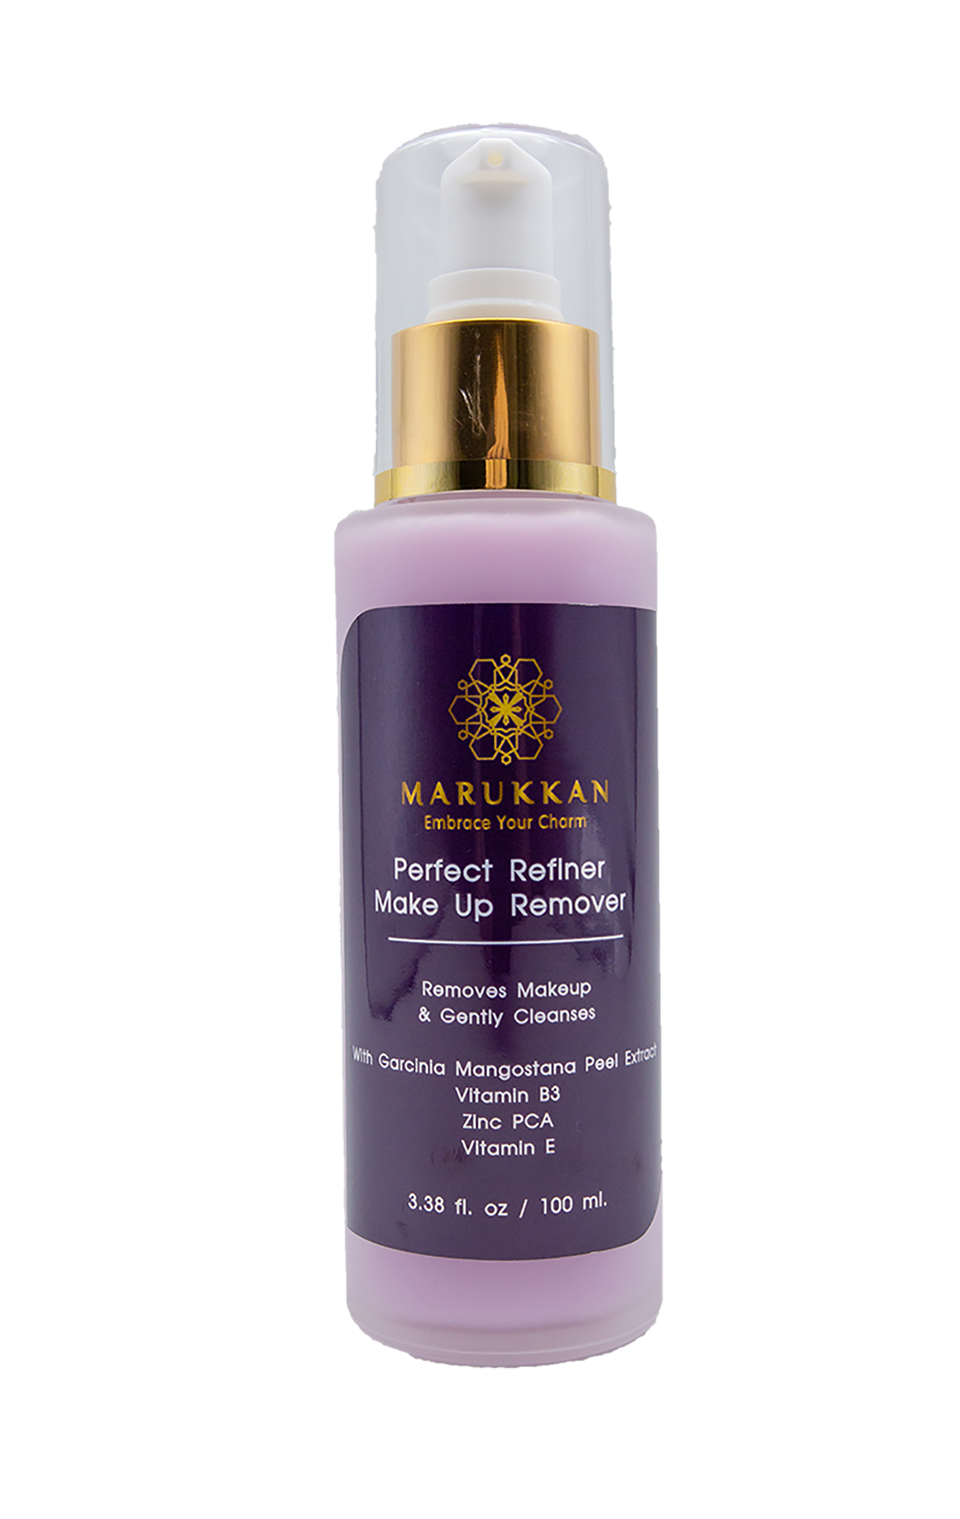 PERFECT REFINER MAKE UP REMOVER